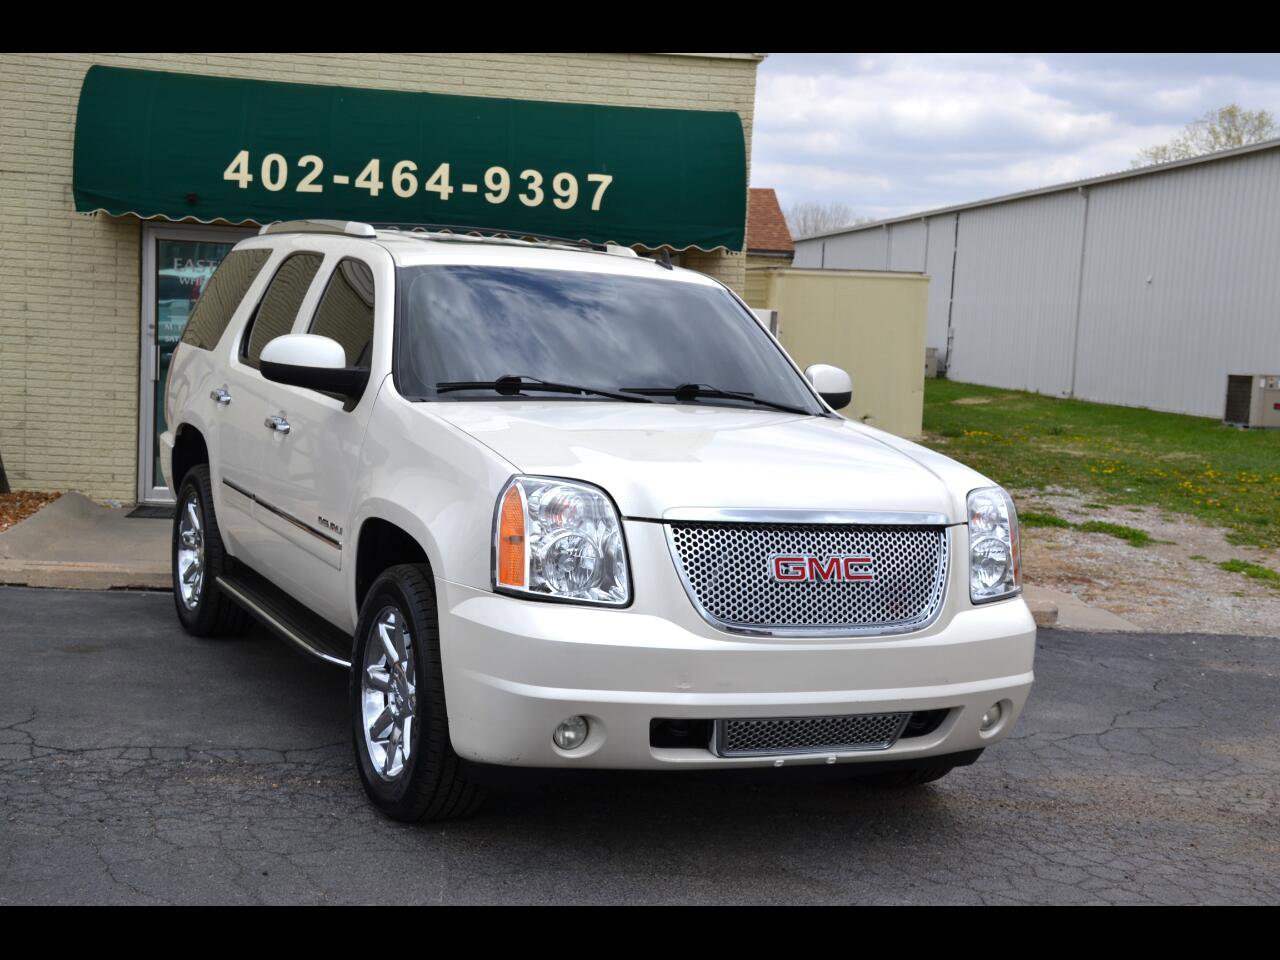 Used 2011 GMC Yukon for Sale Right Now - Autotrader